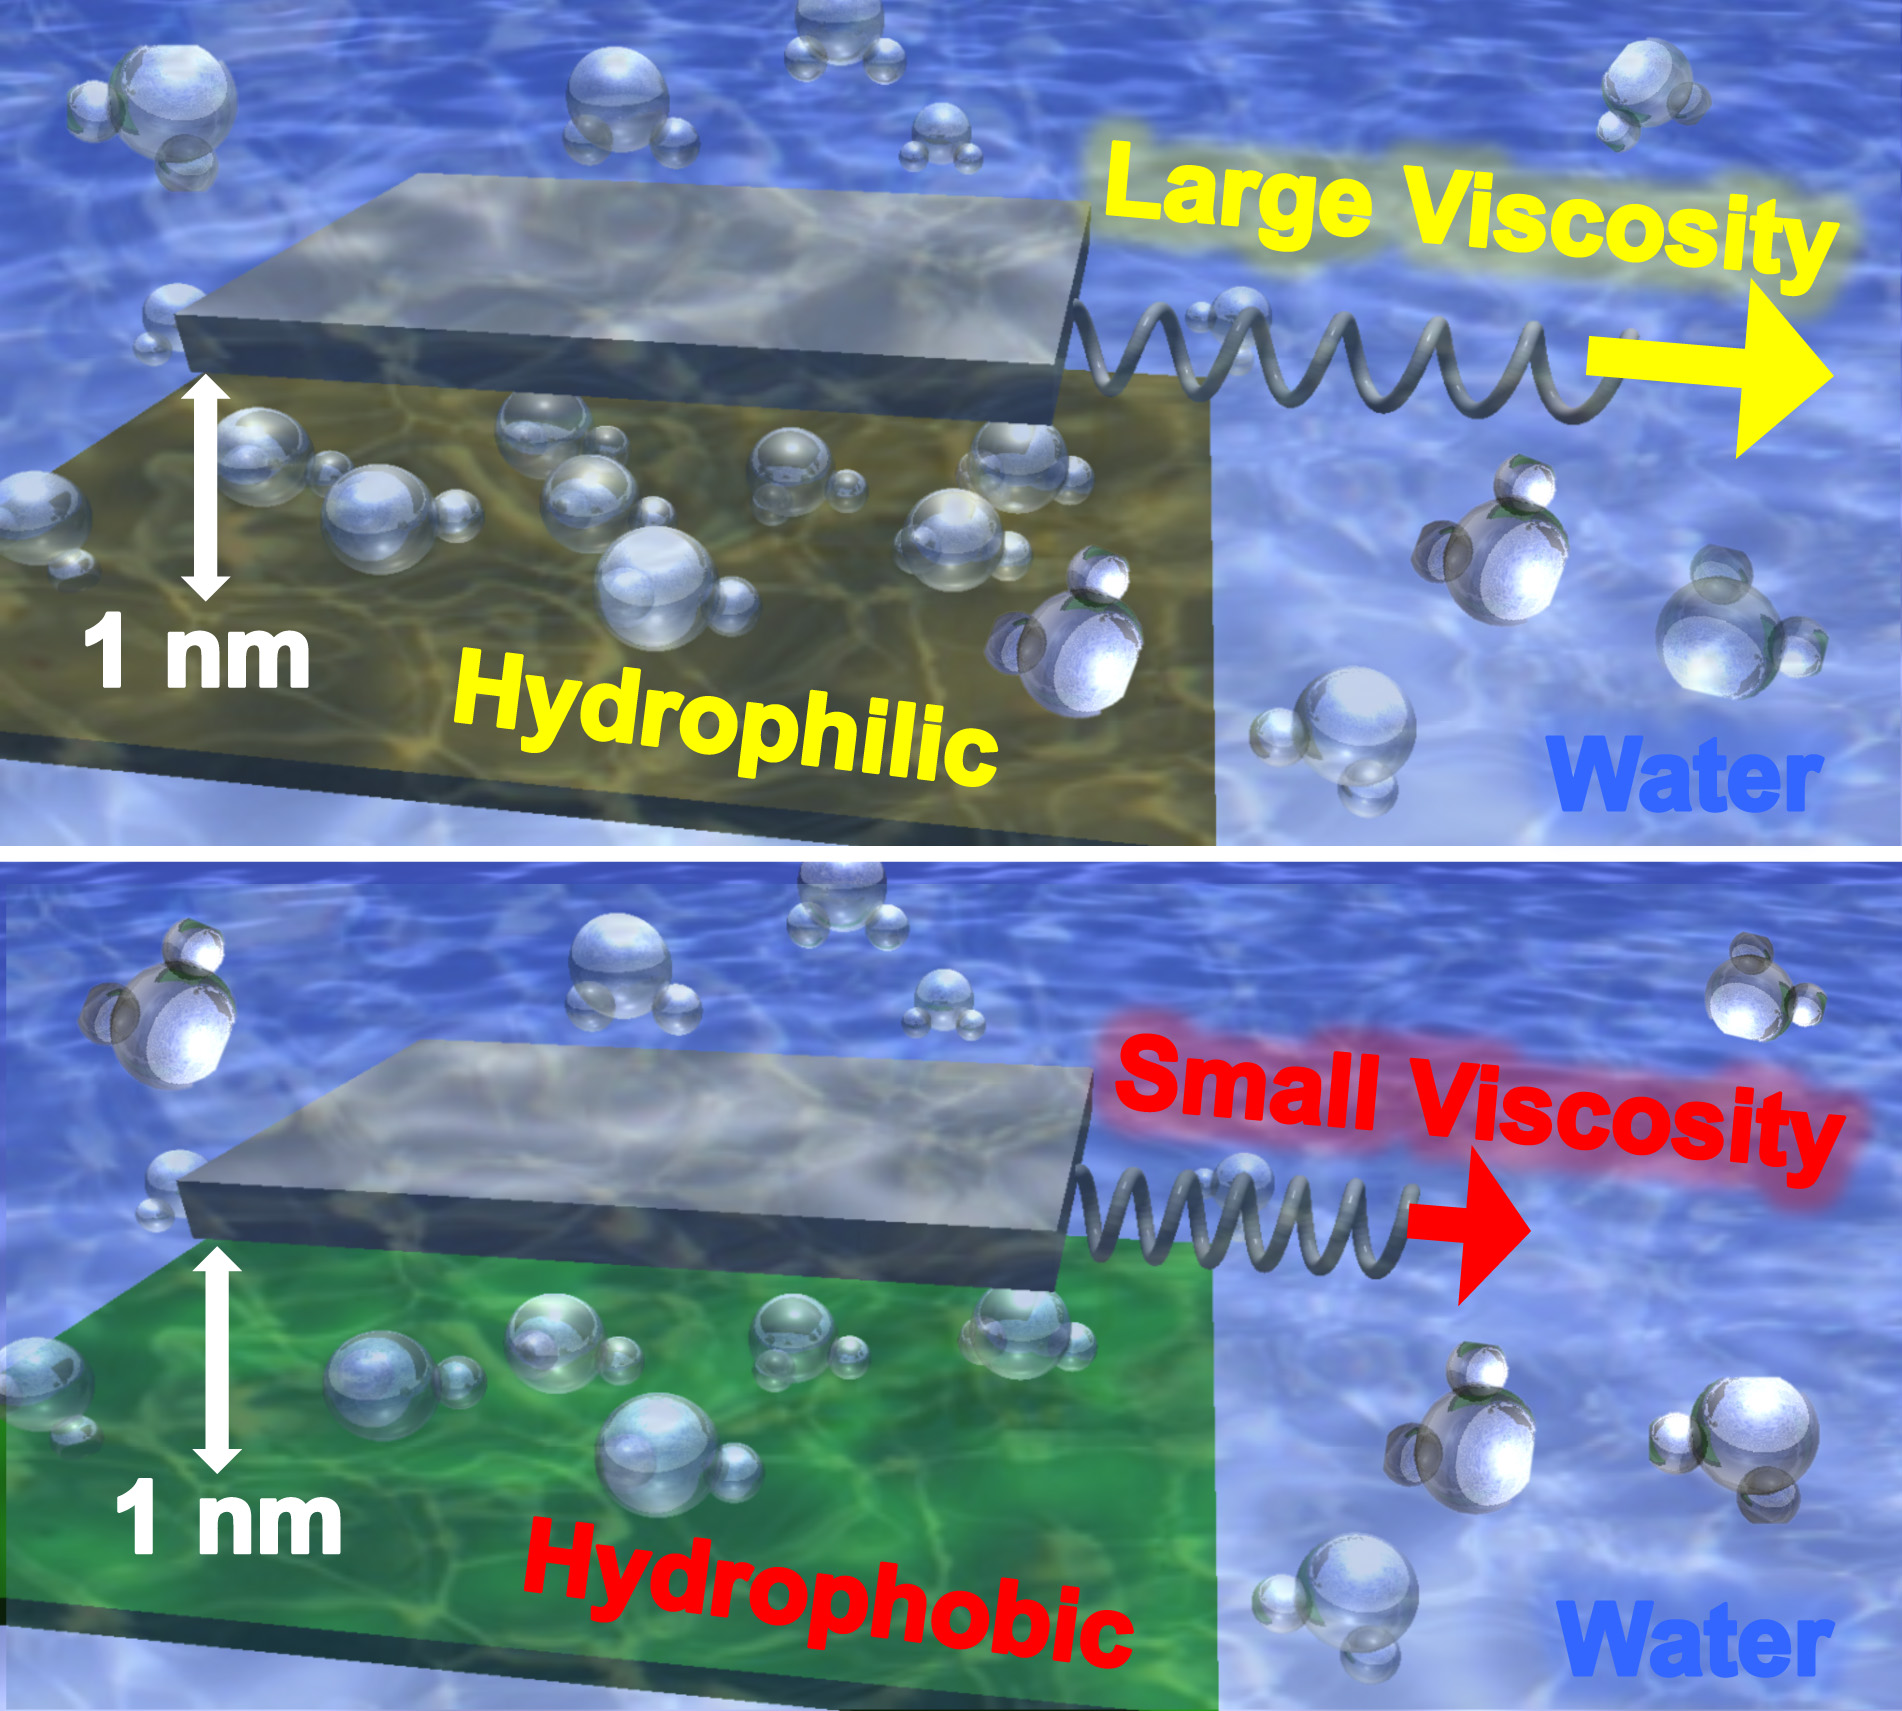 Illustration shows how the different effective viscosity of water affects the force required to slide two surfaces separated by a thin layer of water when confined by a hydrophilic material or a hydrophobic material. (Illustration courtesy of Elisa Riedo)